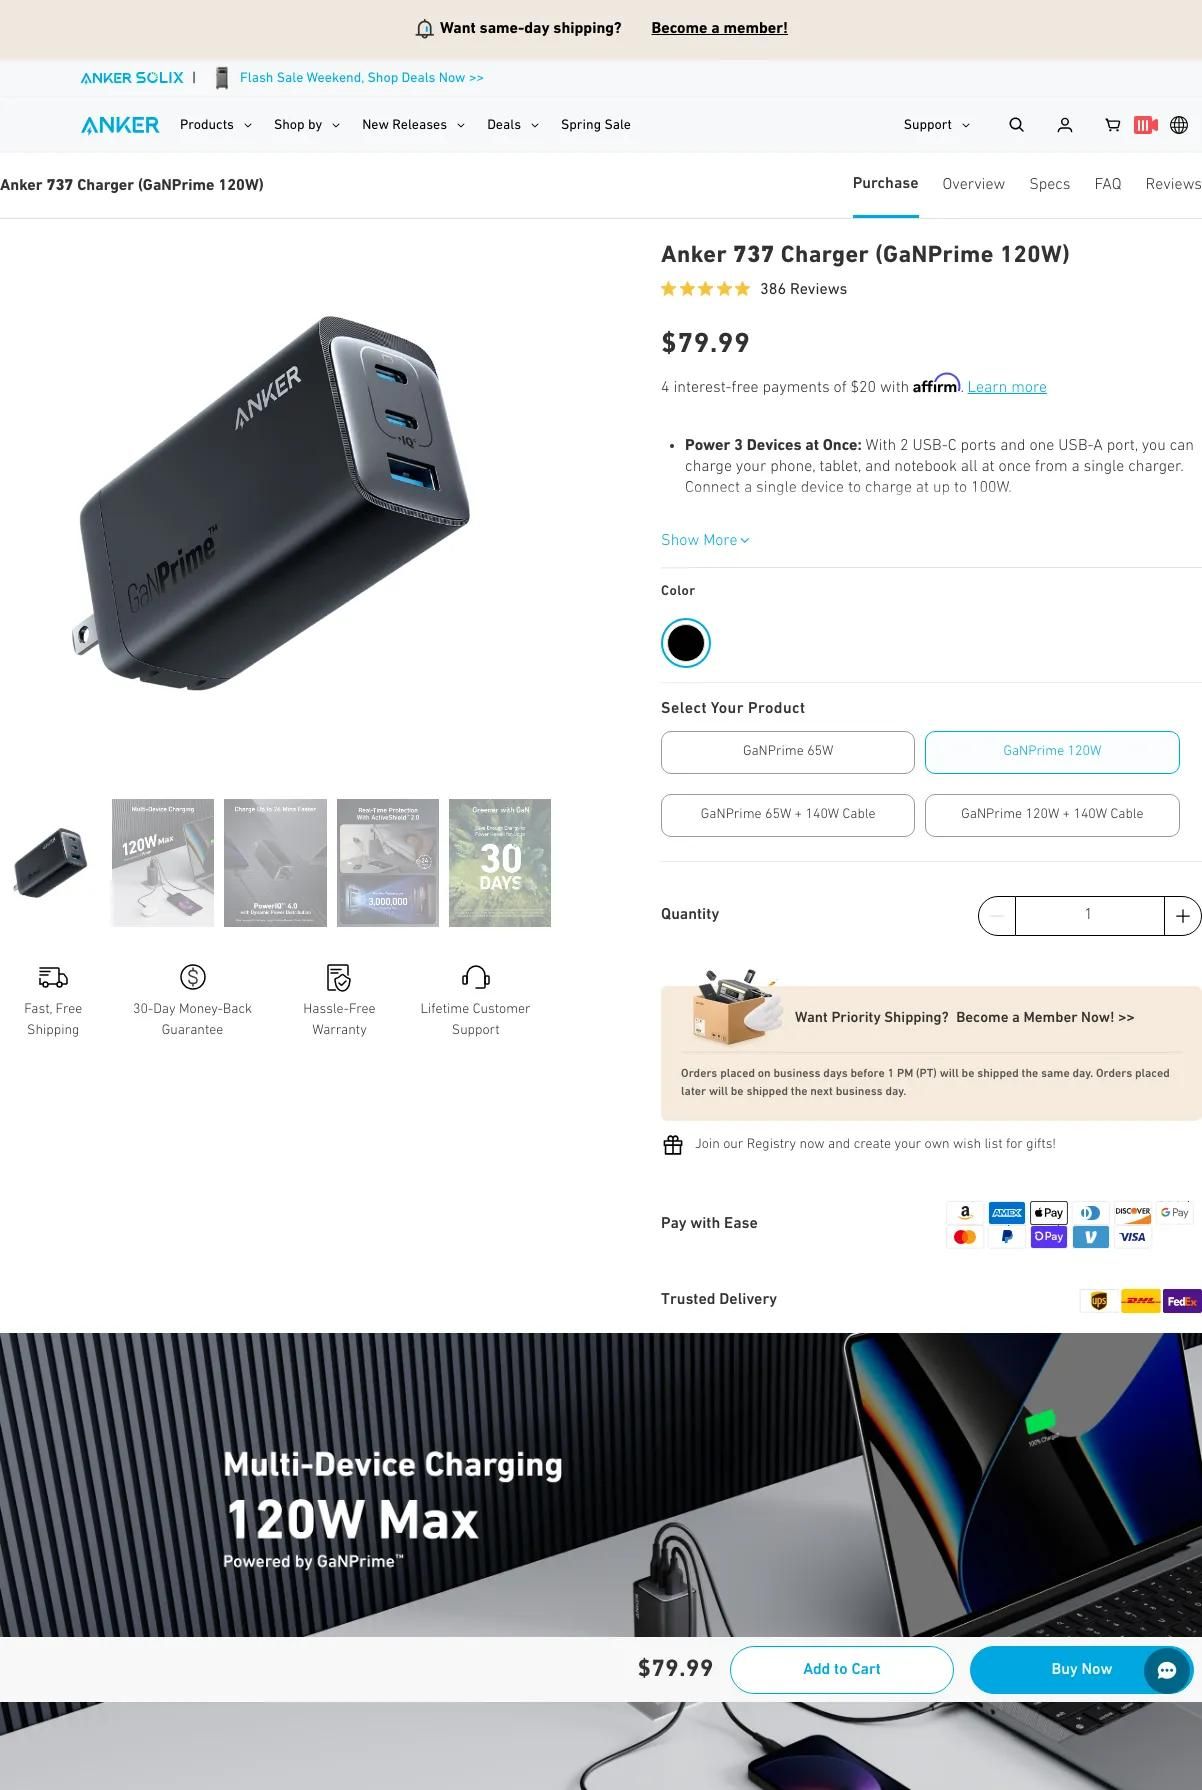 Screenshot 2 of Anker (Example Shopify Website)